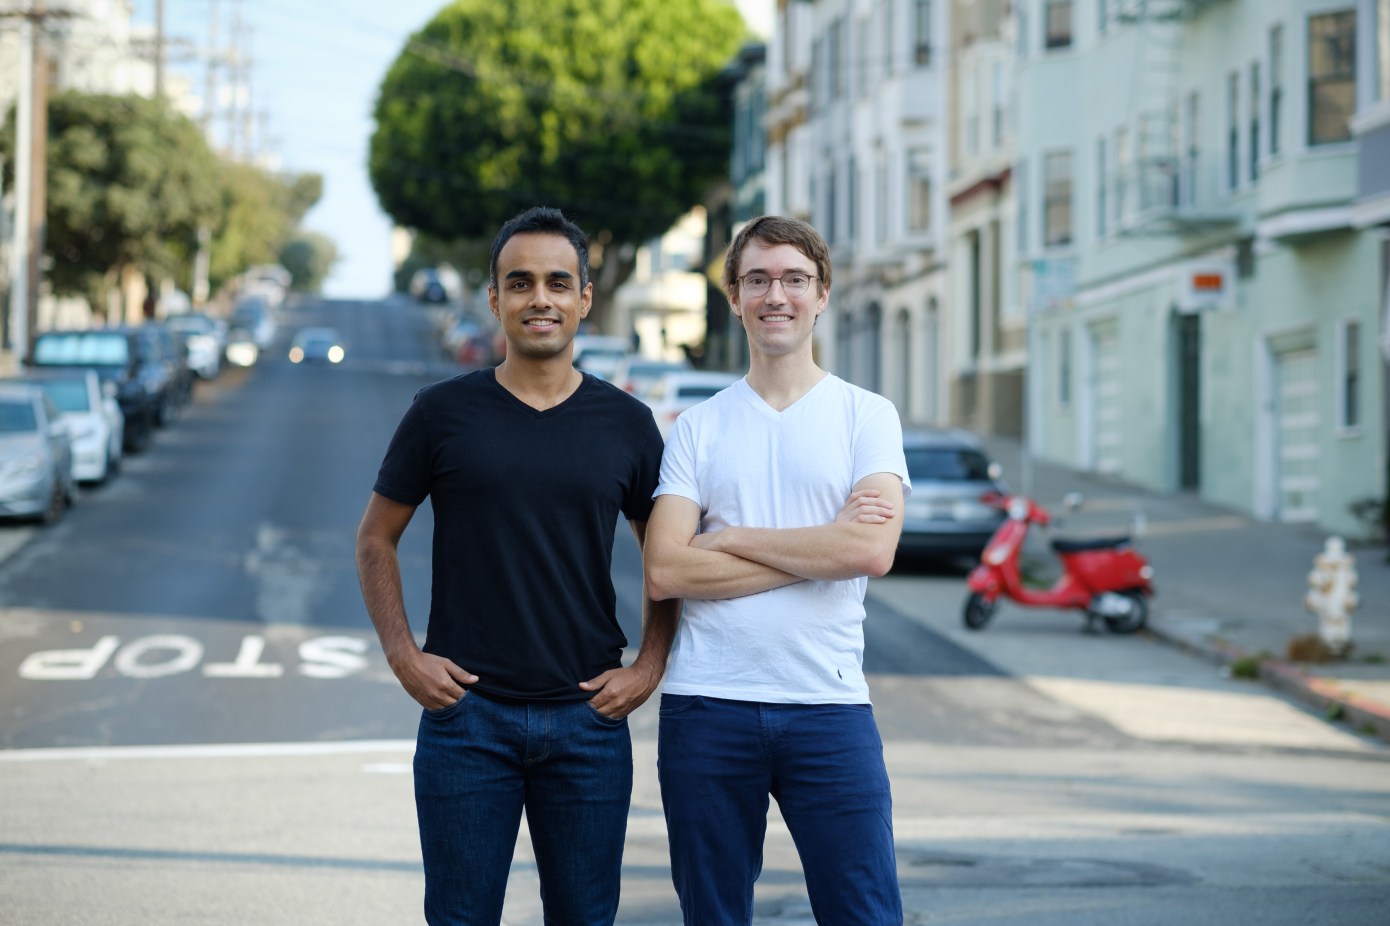 Lime and Scoot veterans have built Ridepanda, a one-stop micromobility marketplace